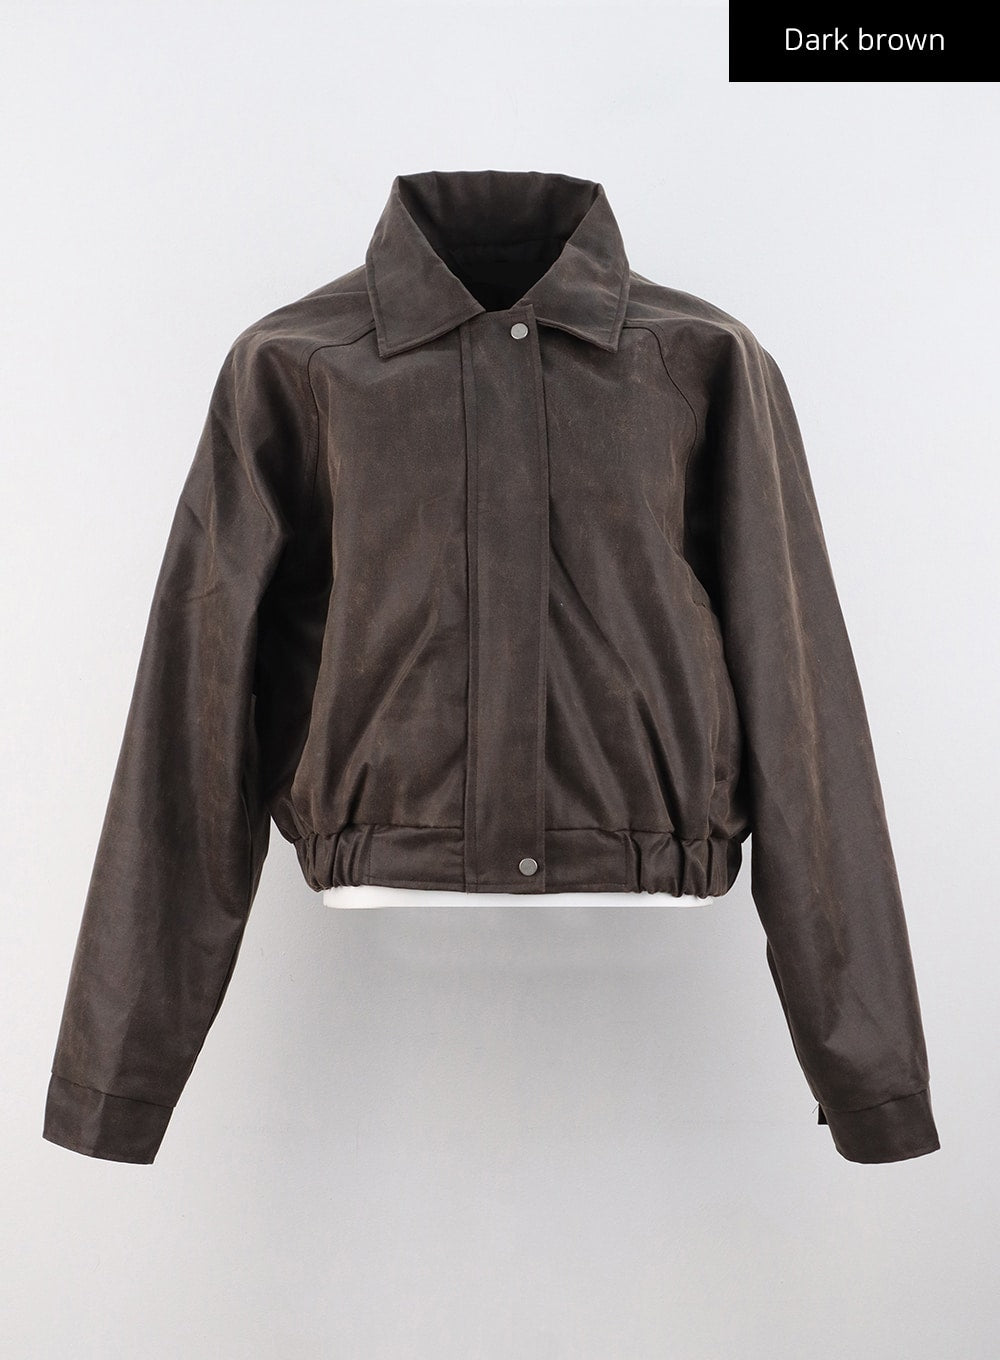 vintage lether bomber jacket dark brownよろしくお願いいたします